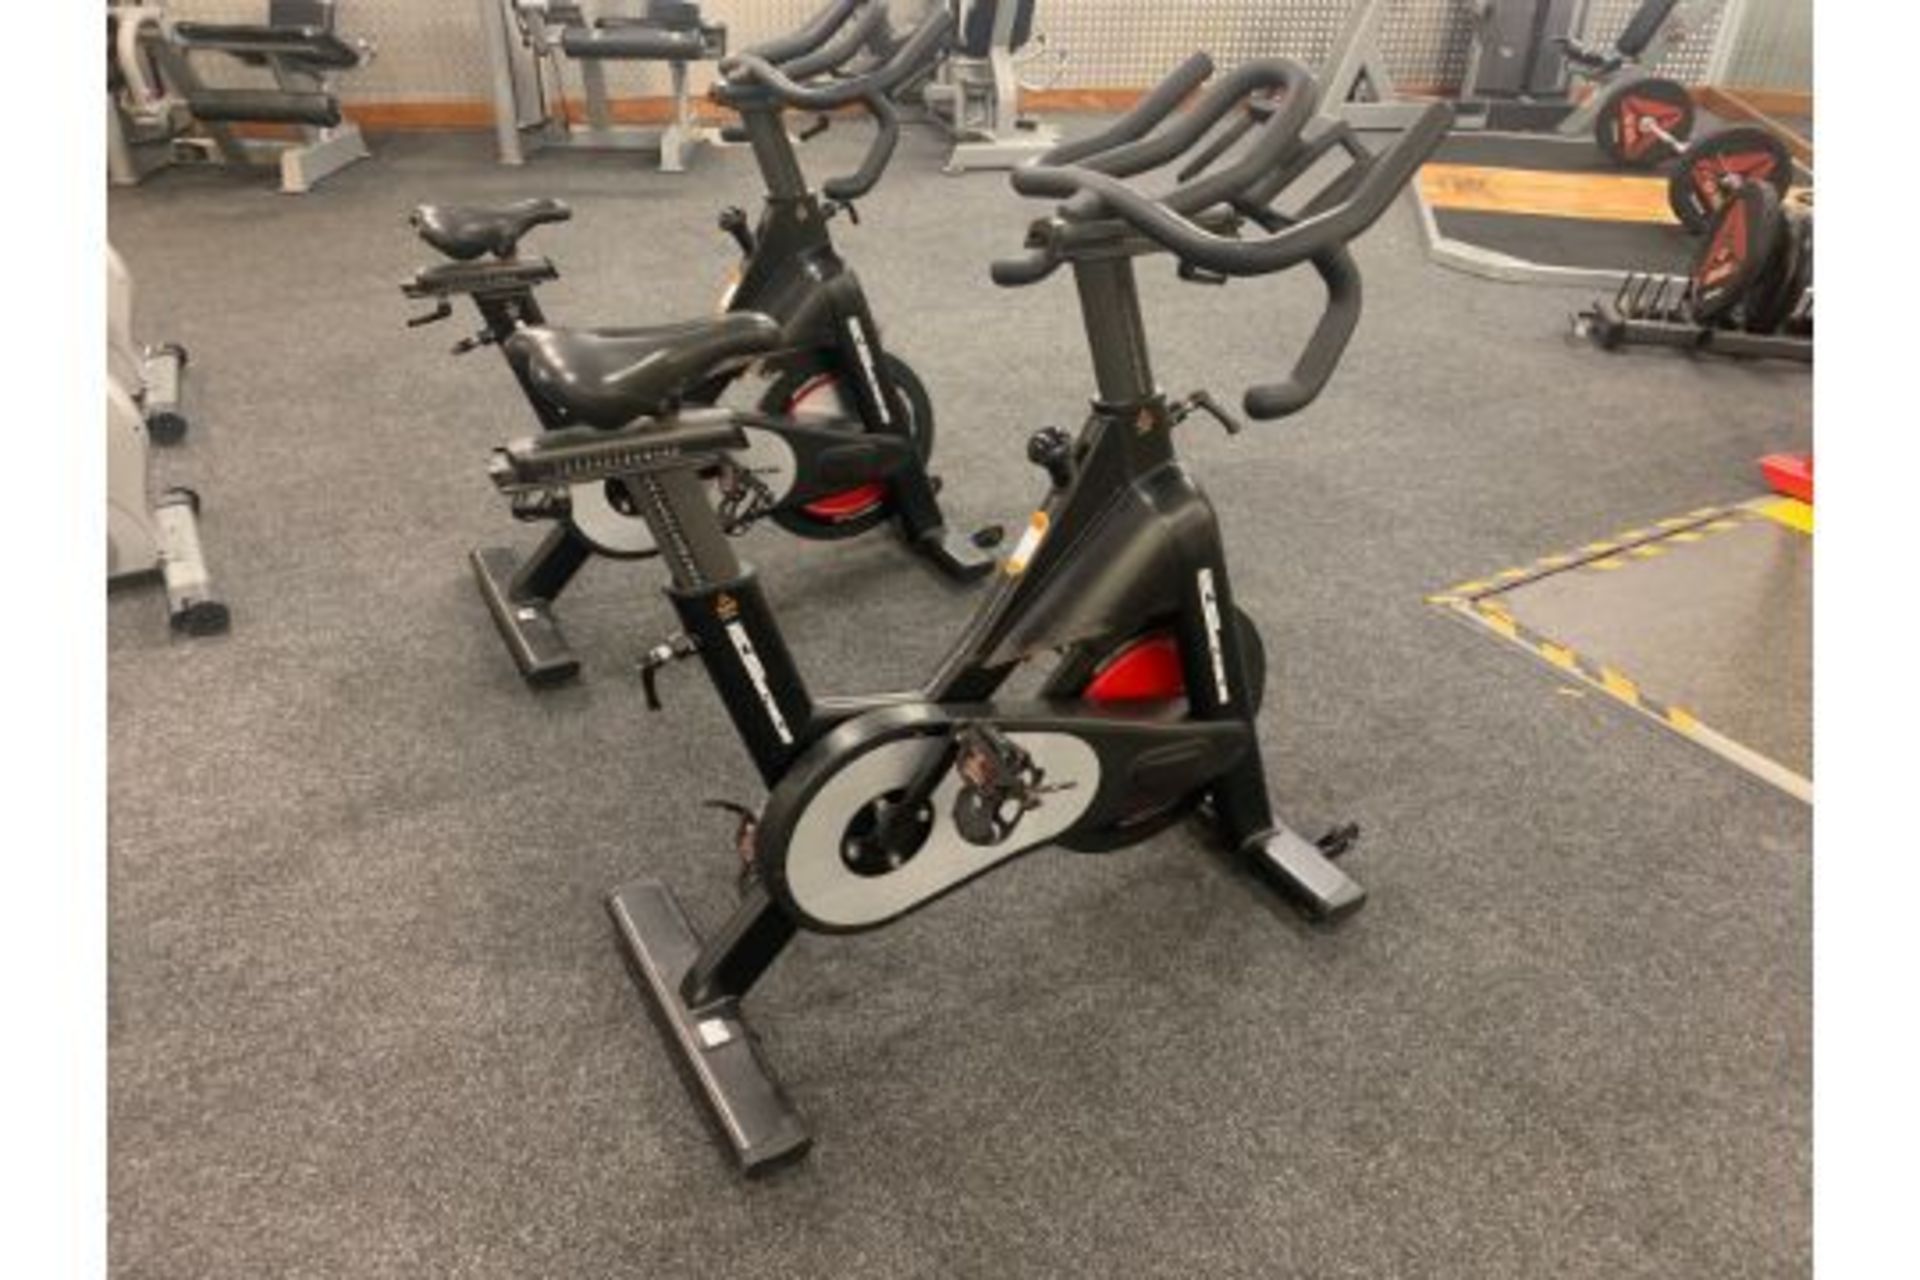 F Series Spin Bike - Image 5 of 5